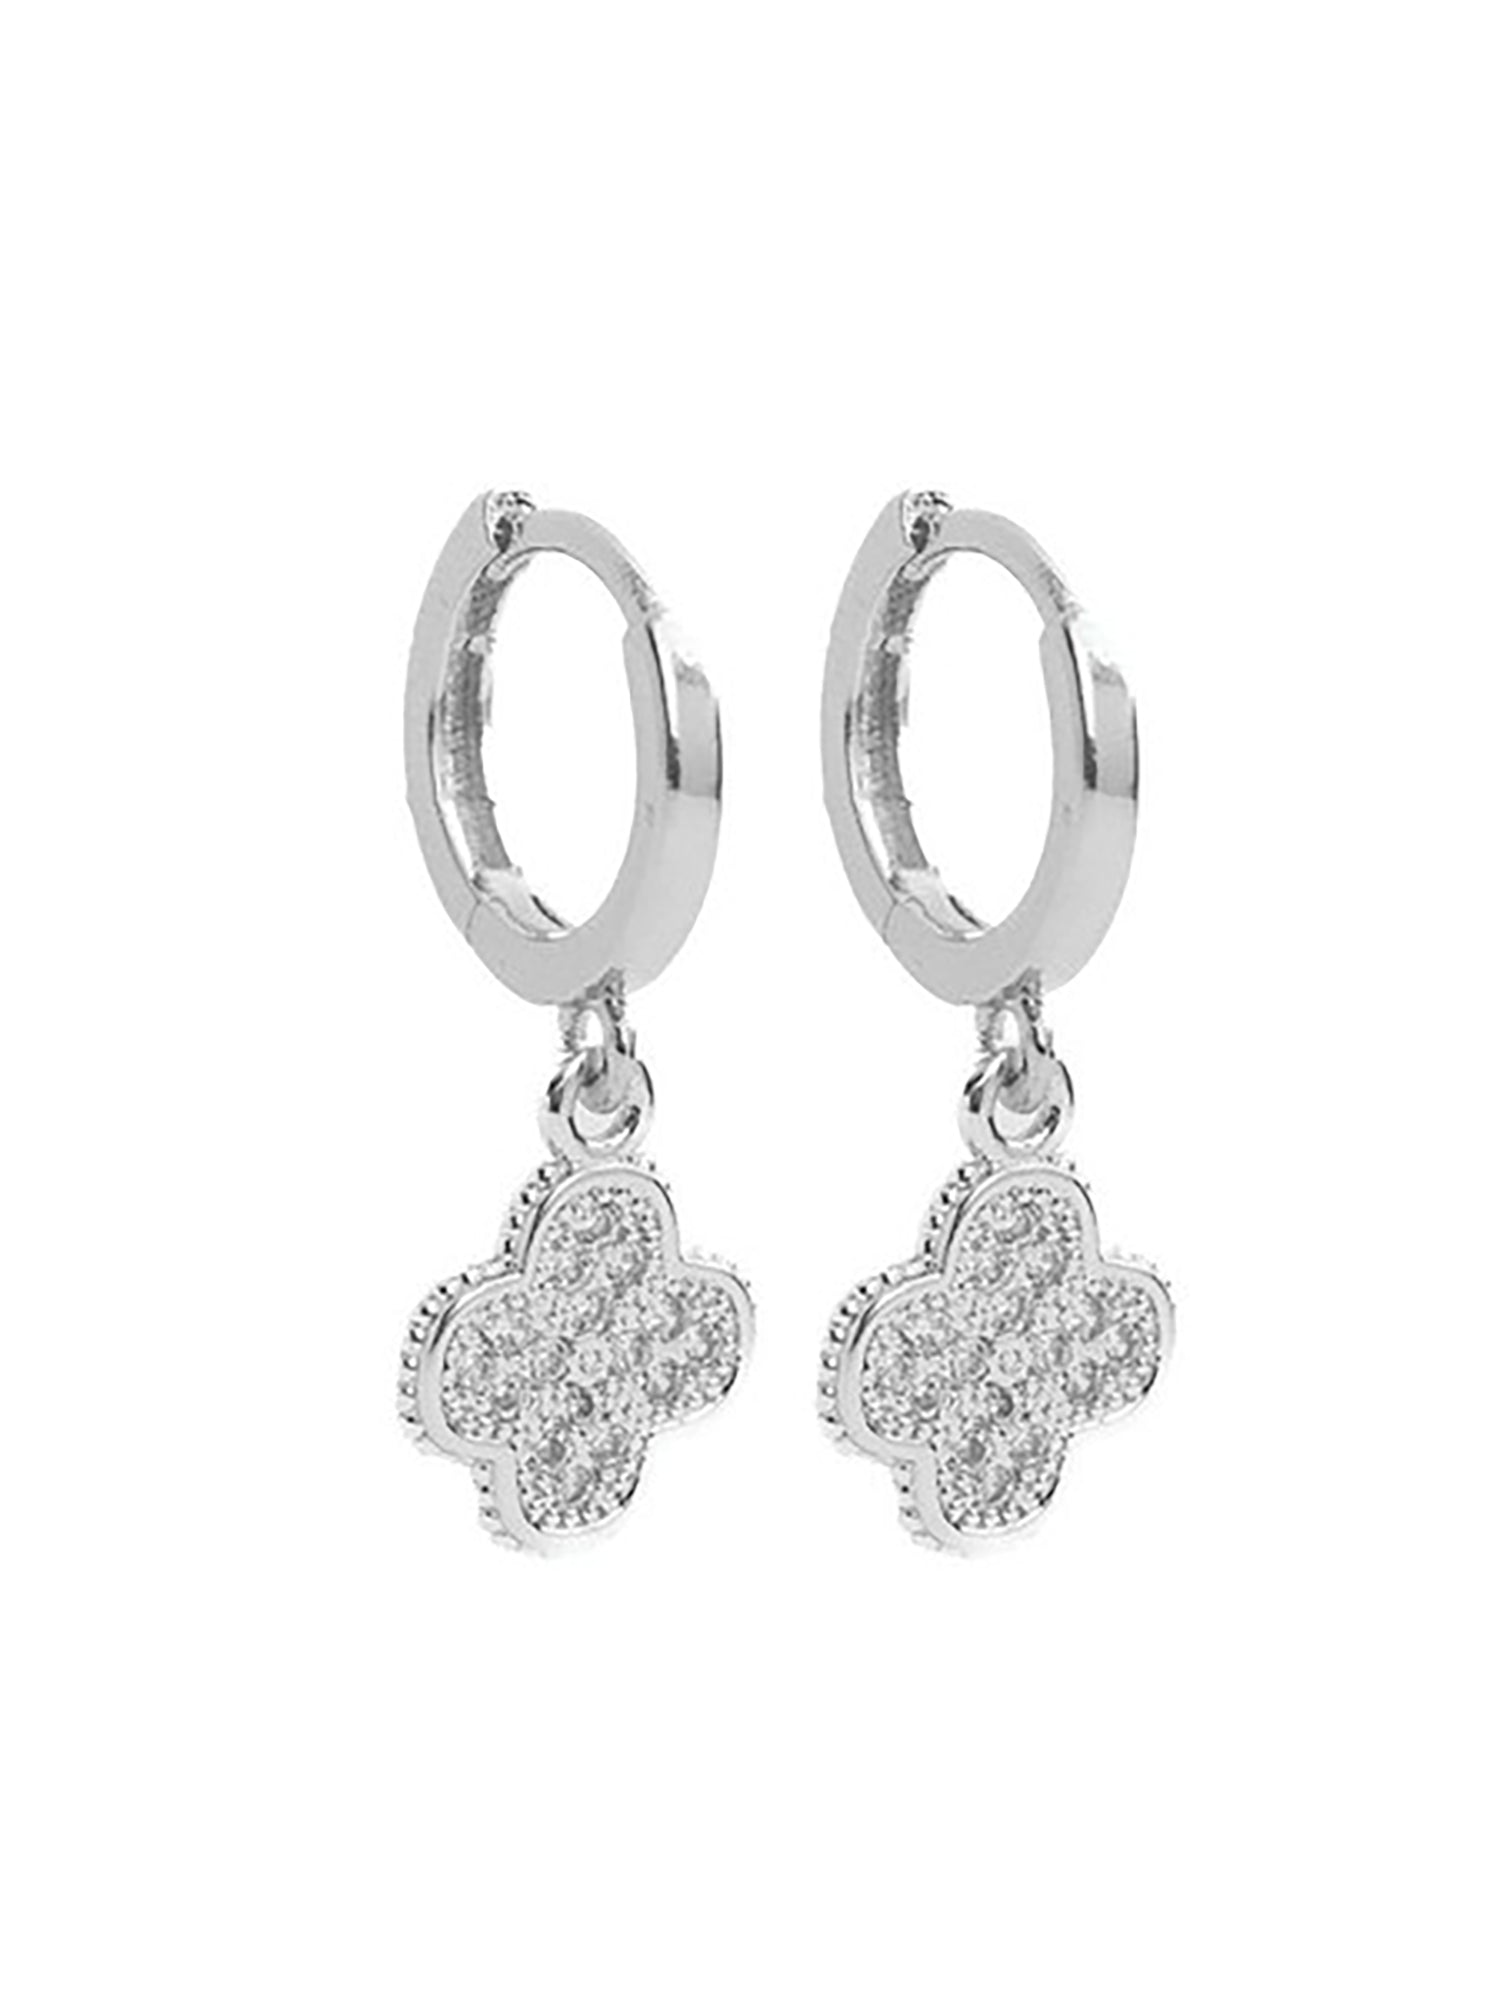 Classic Clover Earrings - Accessory